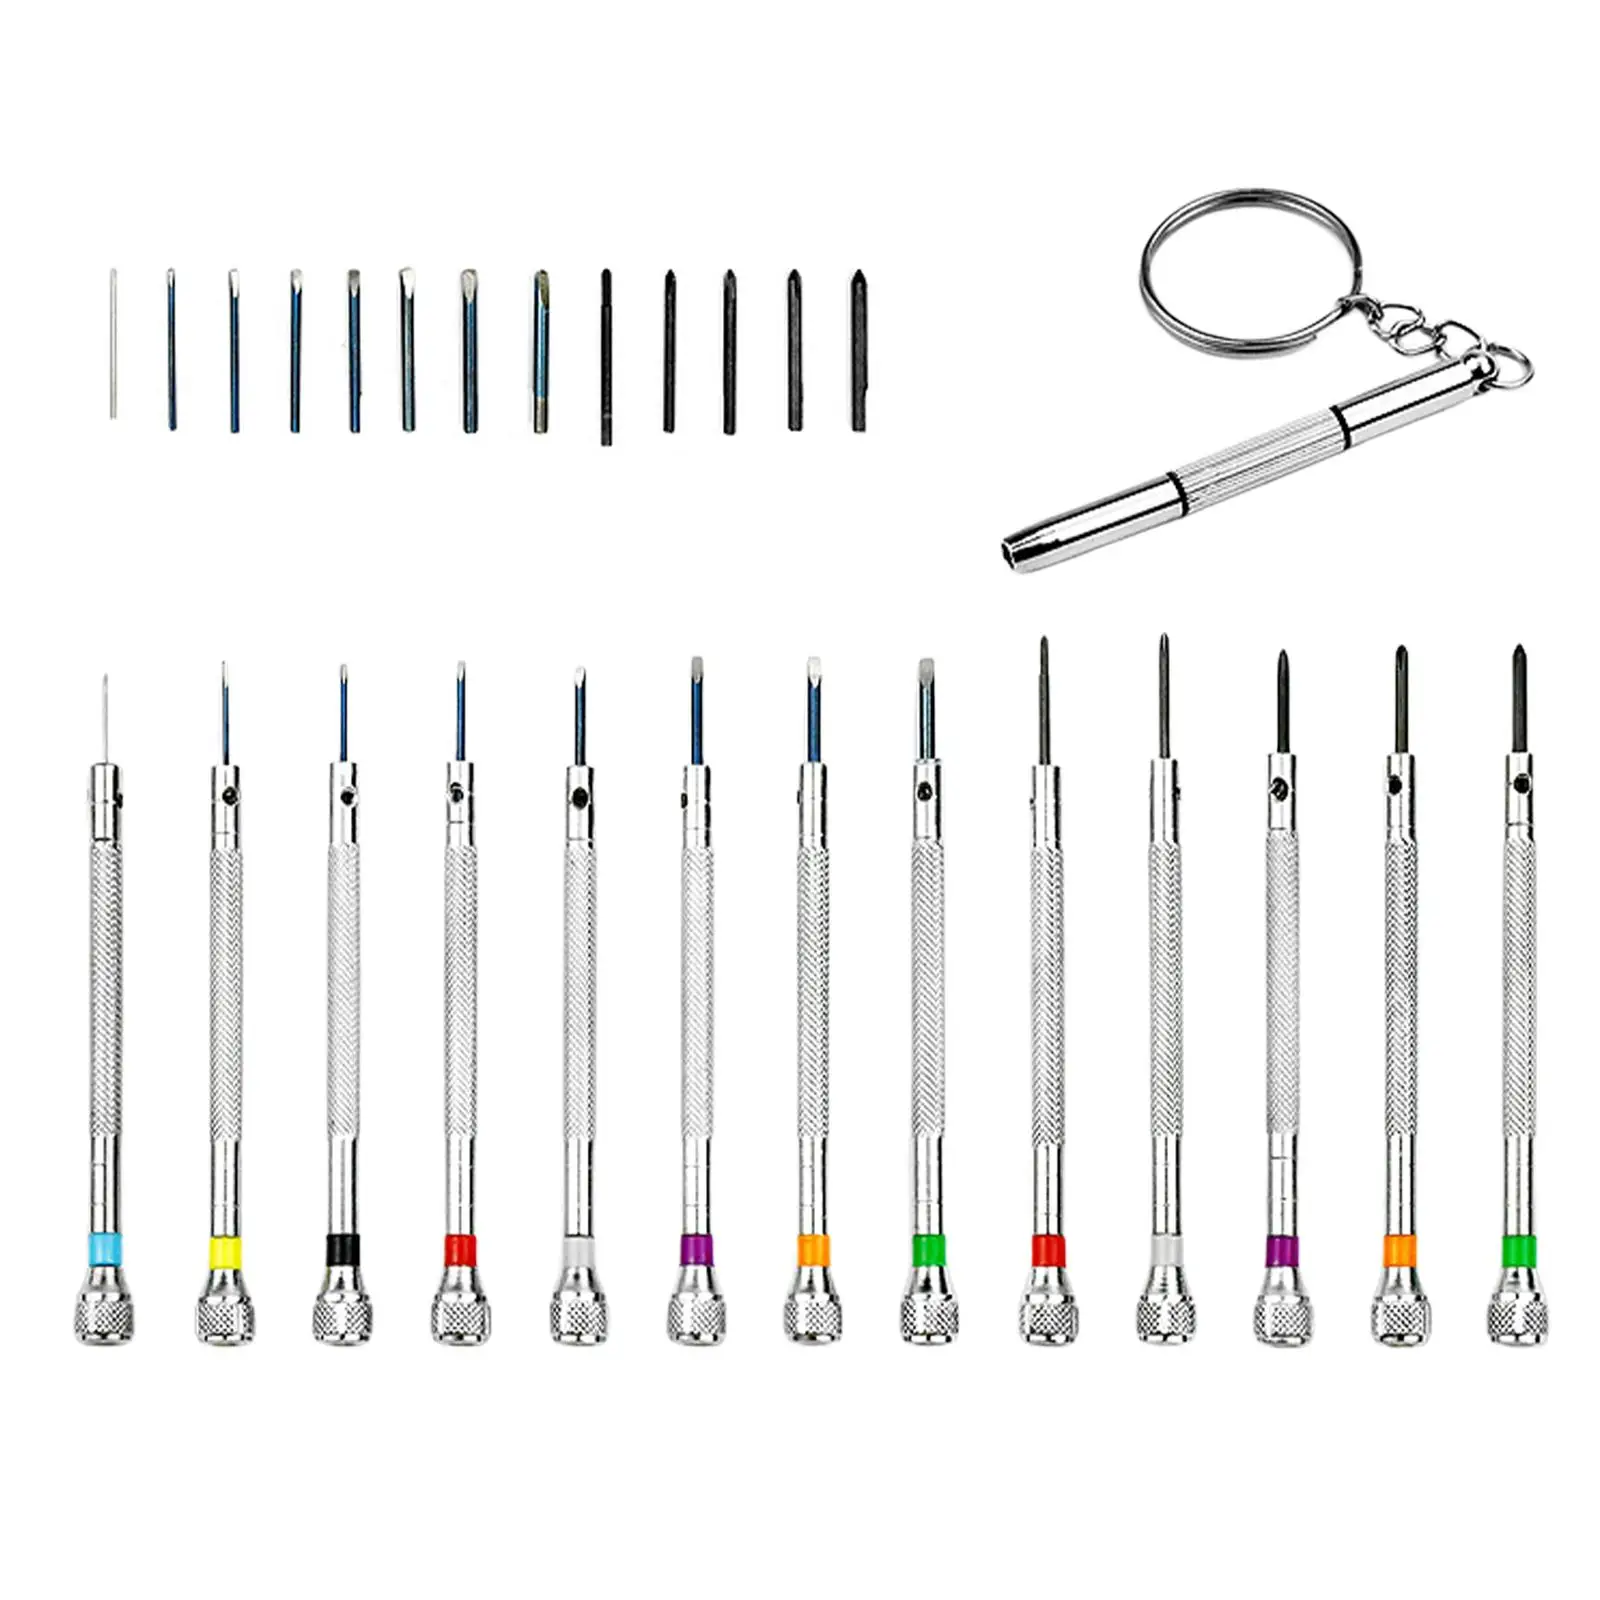 13 Pieces Watch Repair Screwdriver Set Screws Lightweight Small Portable Household for Watch Phone Glasses Camera Computer